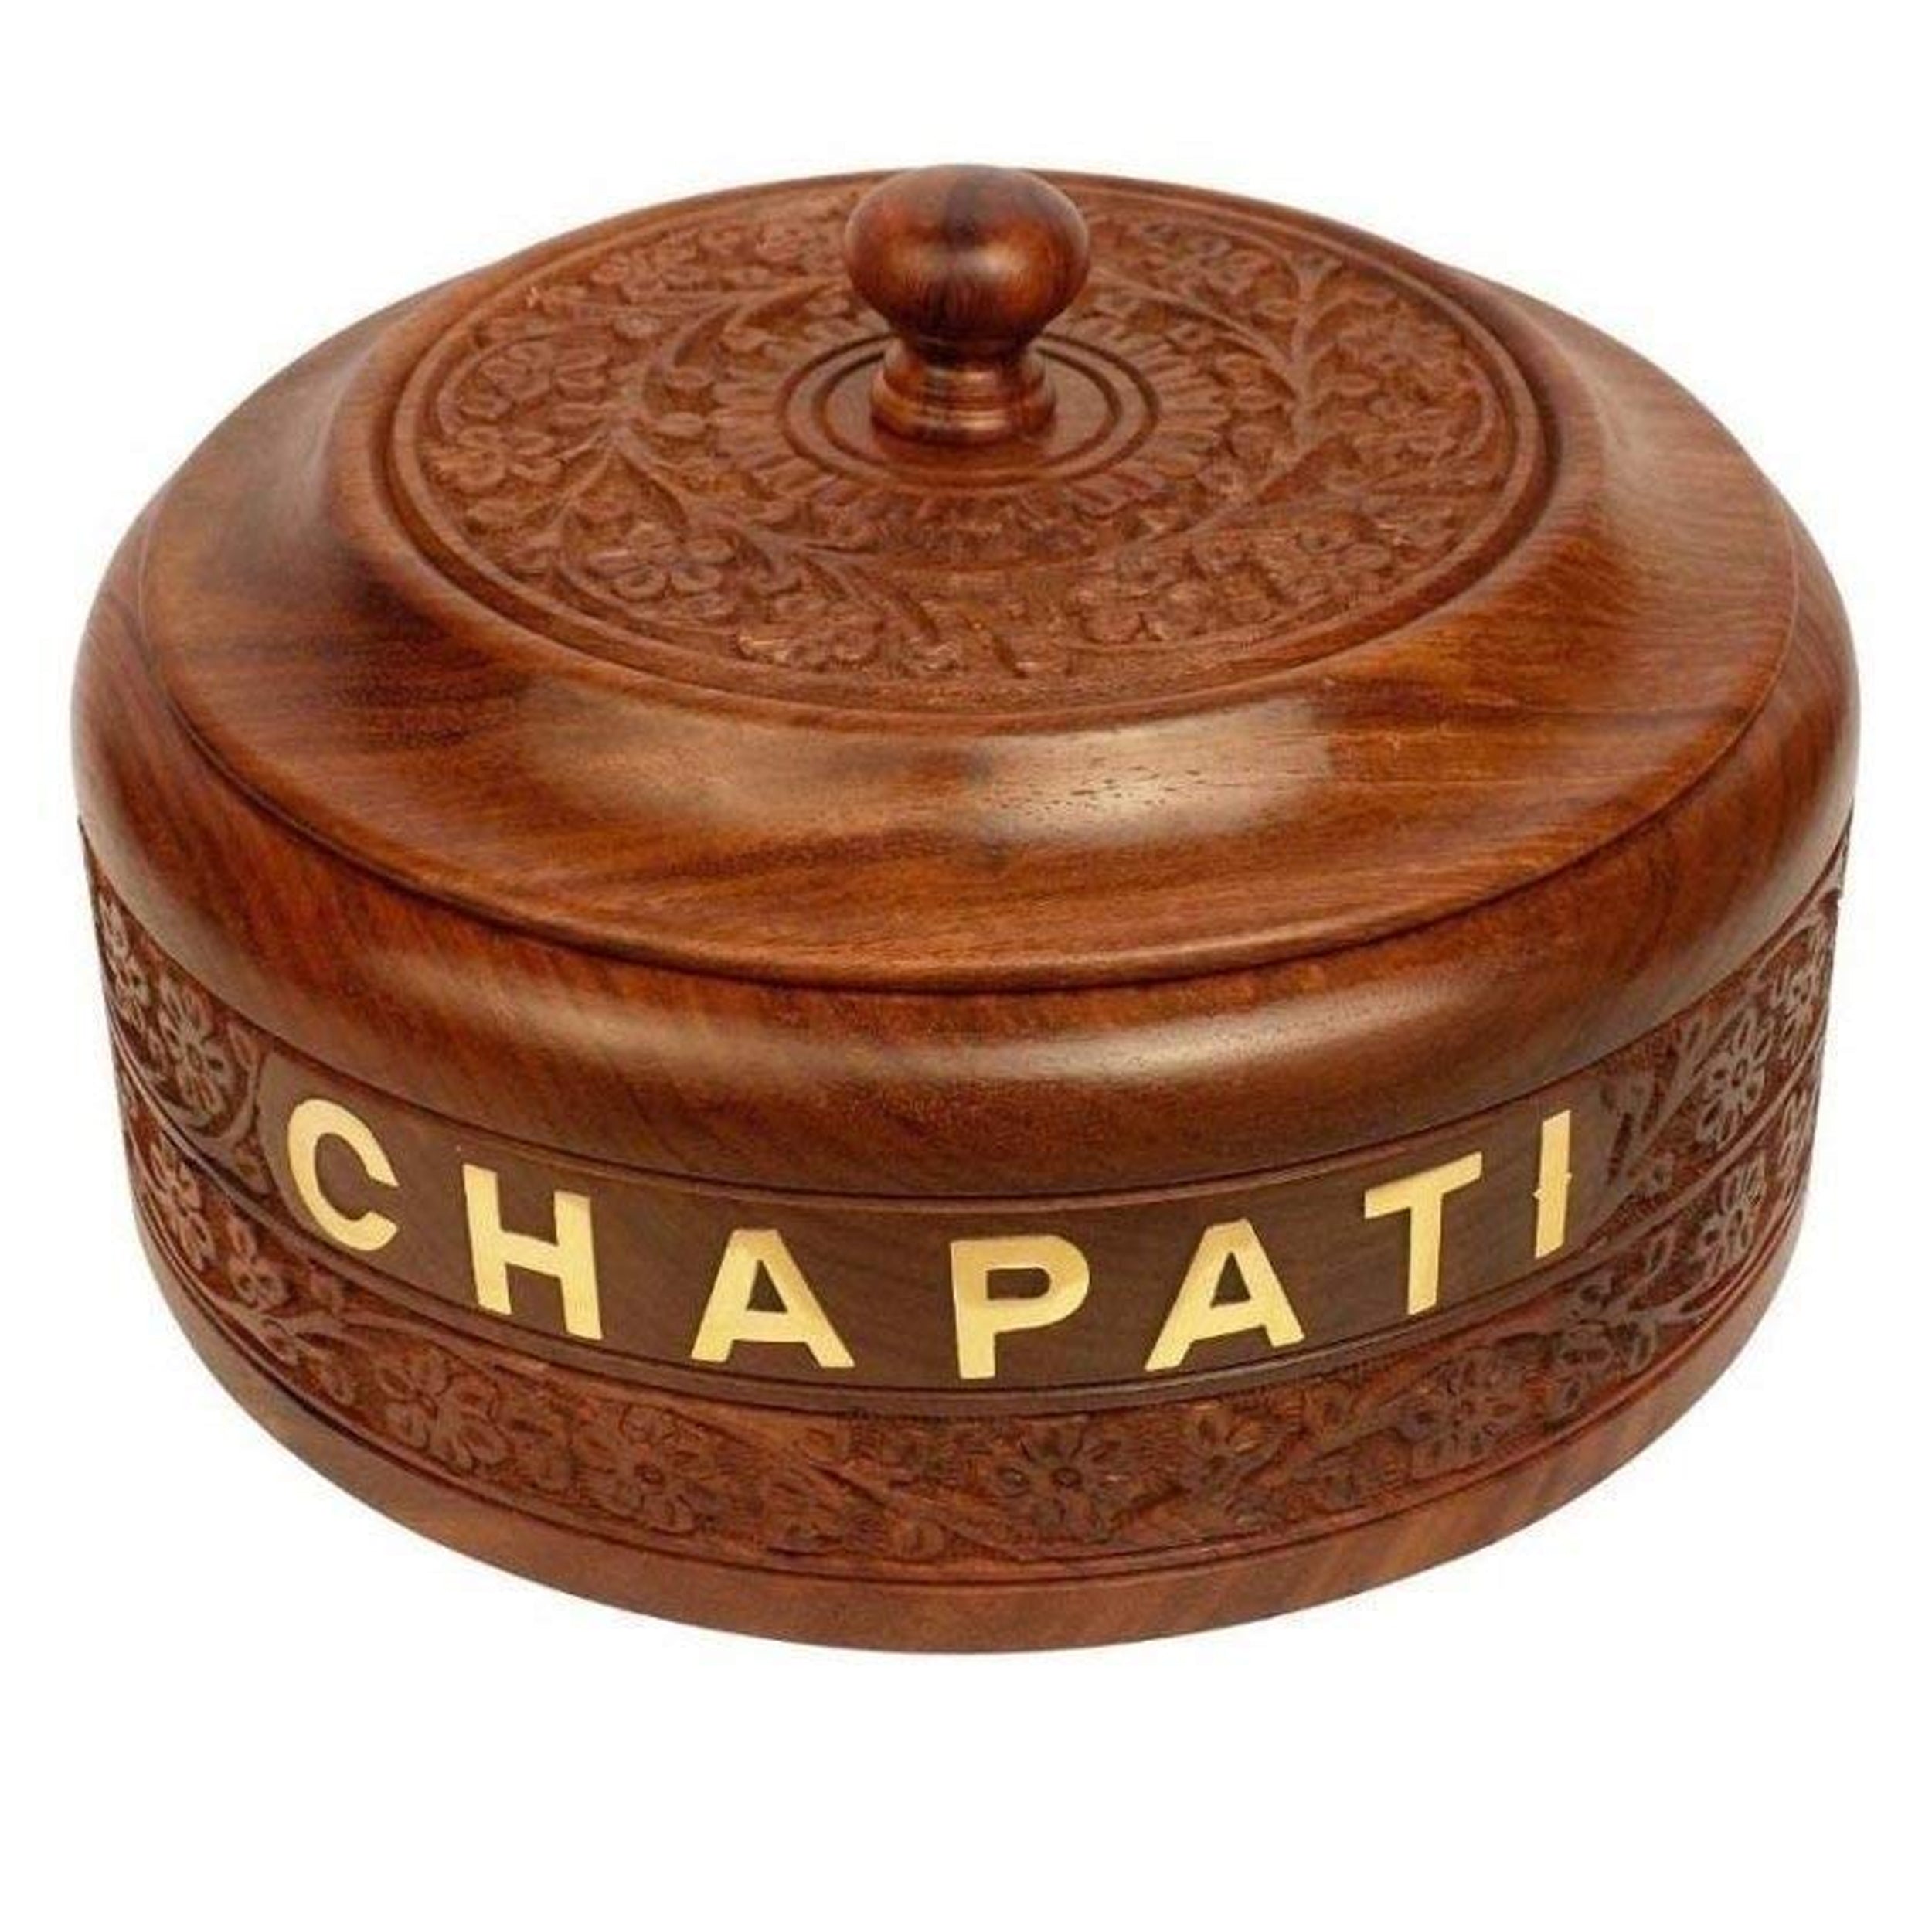 Serve with Style Handmade Wooden Round Chapati Casserole Box